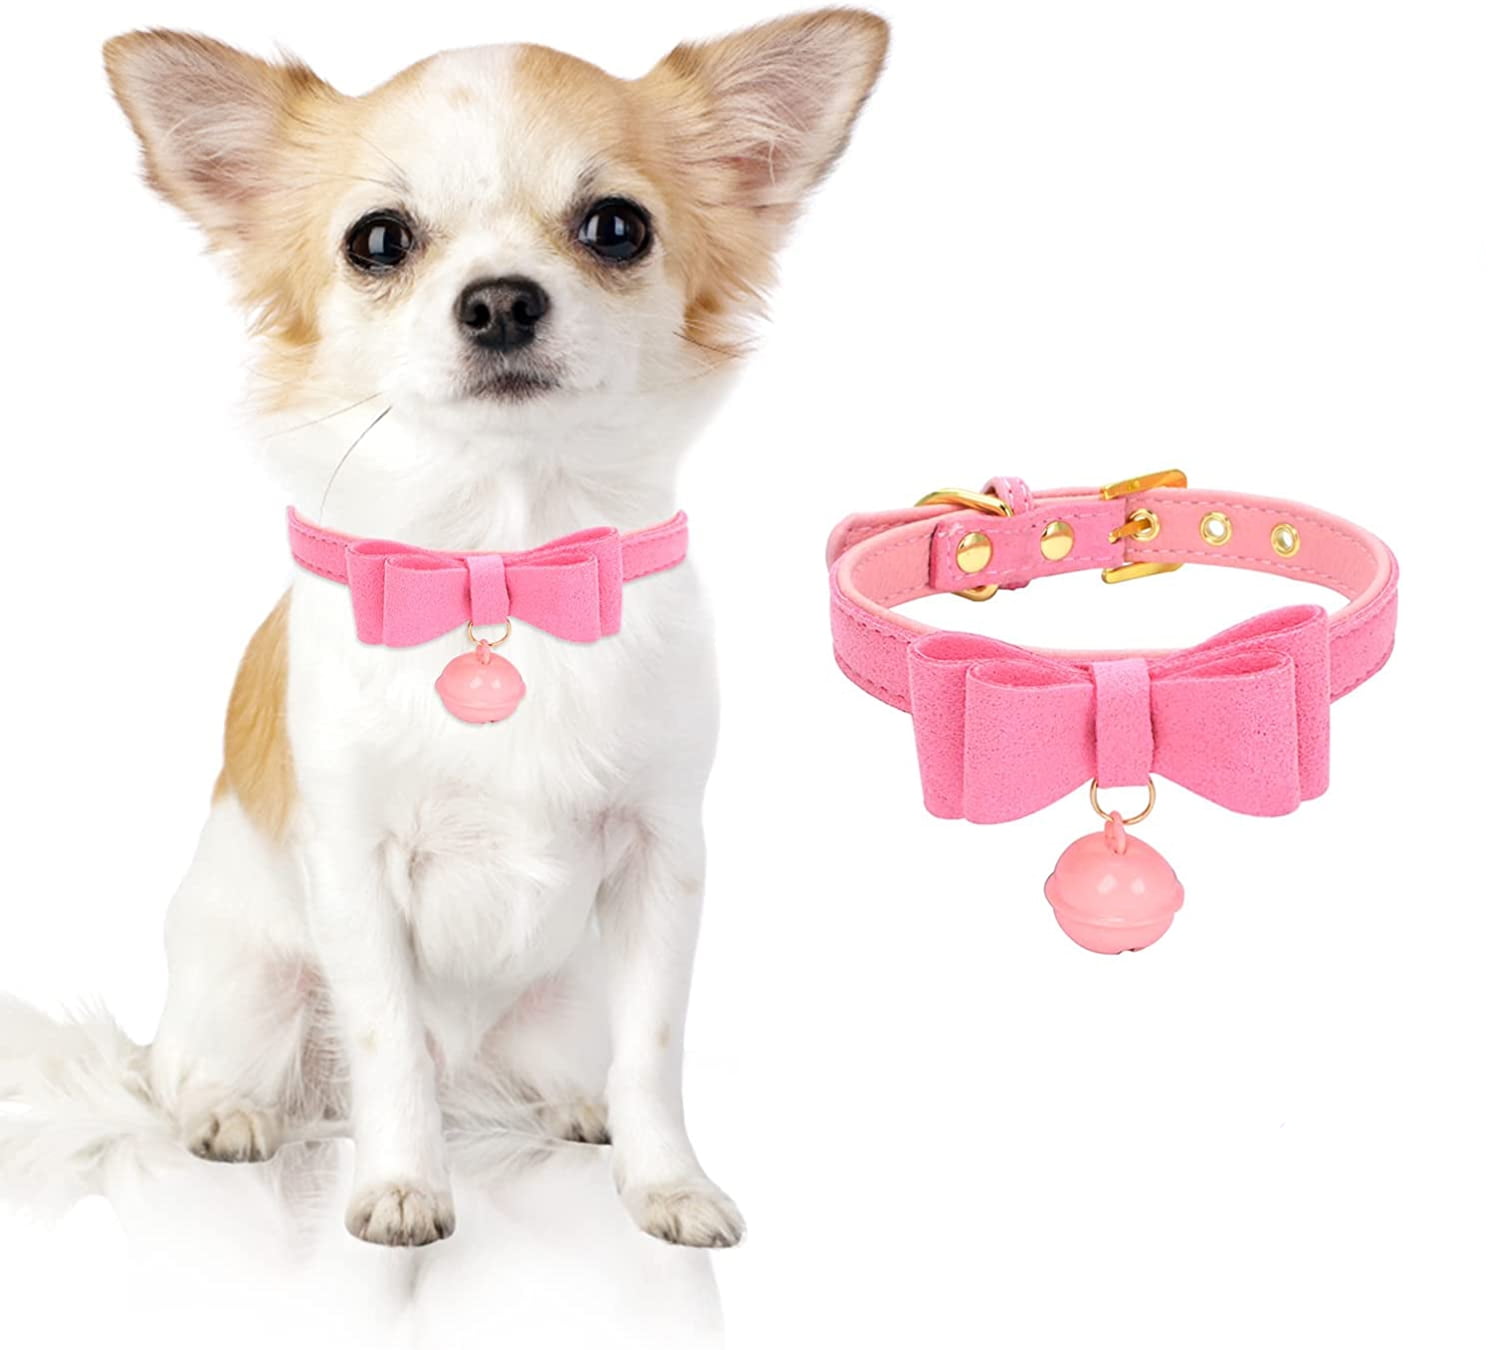  Elegant little tail Pink Leather Dog Collar, Durable Pet Collar,  Flower Pattern Bow Tie Dog Collar Adjustable Girl Dog Collars for Small Dogs  : Pet Supplies